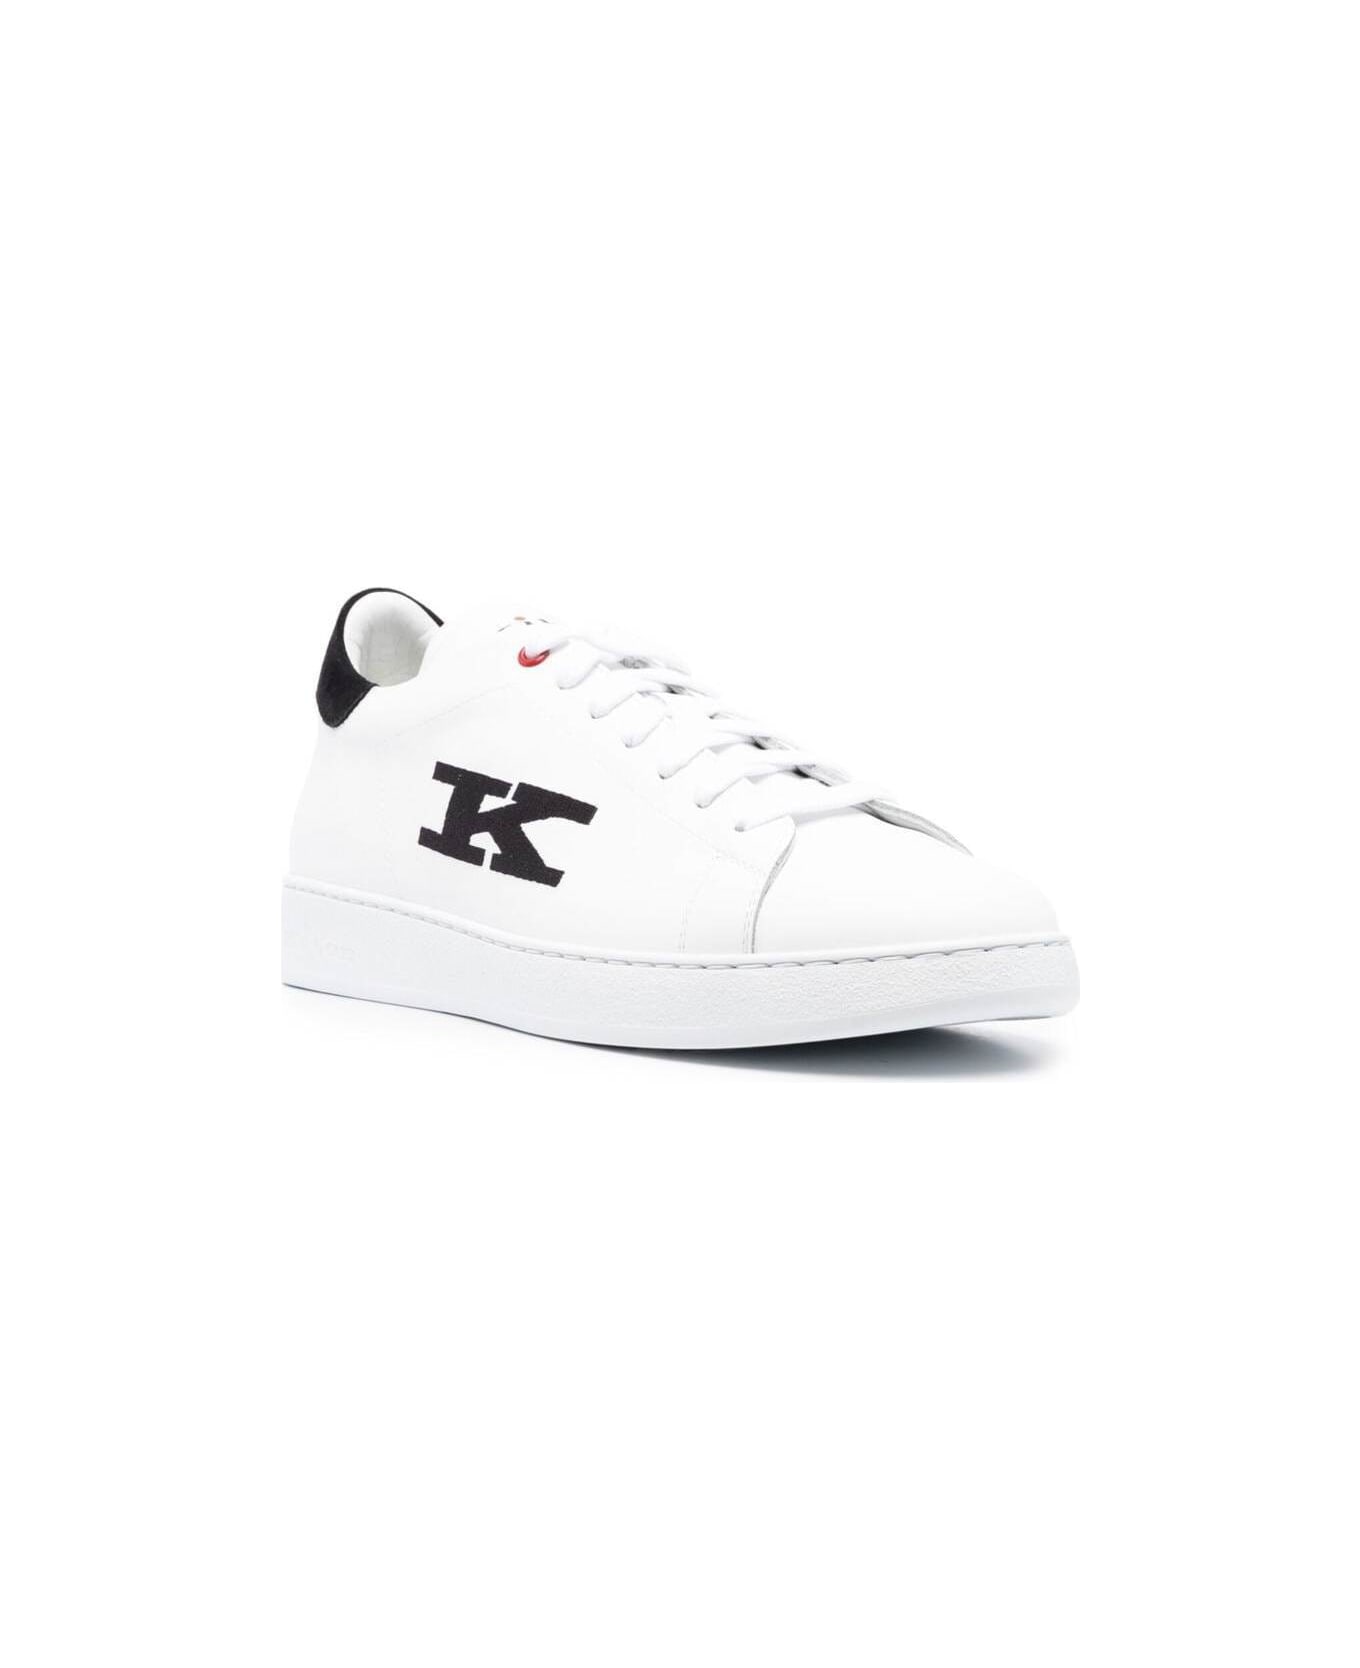 Kiton Black And White Sneakers With Logo And Contrasting Stitching In Leather Man - White